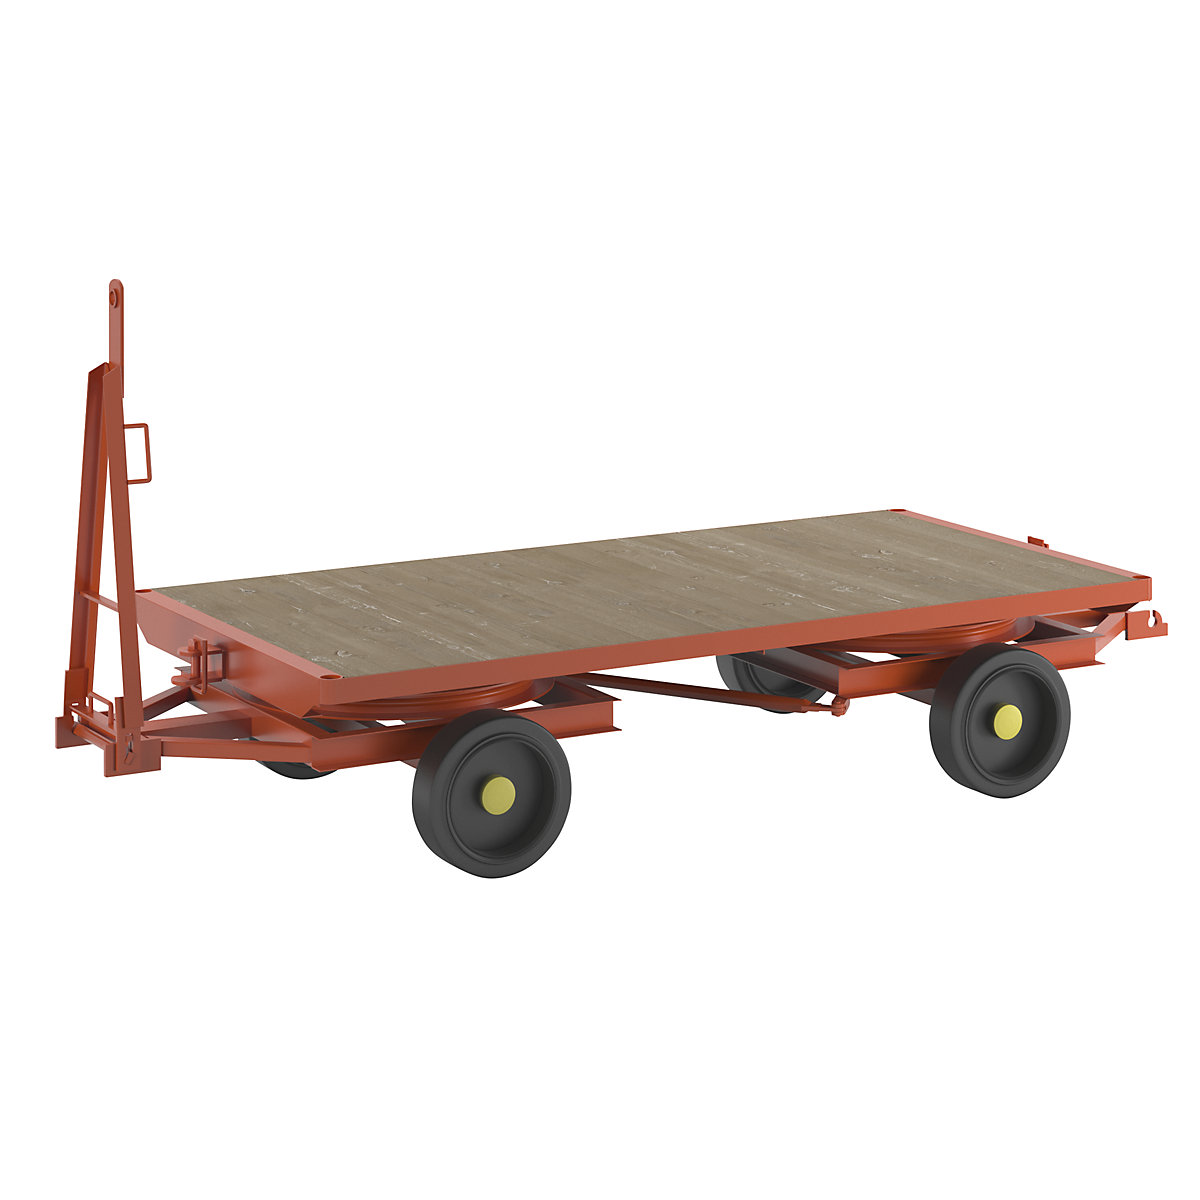 Trailer, 4-wheel double turntable steering, max. load 5 t, platform 2.5 x 1.25 m, solid rubber tyres-7